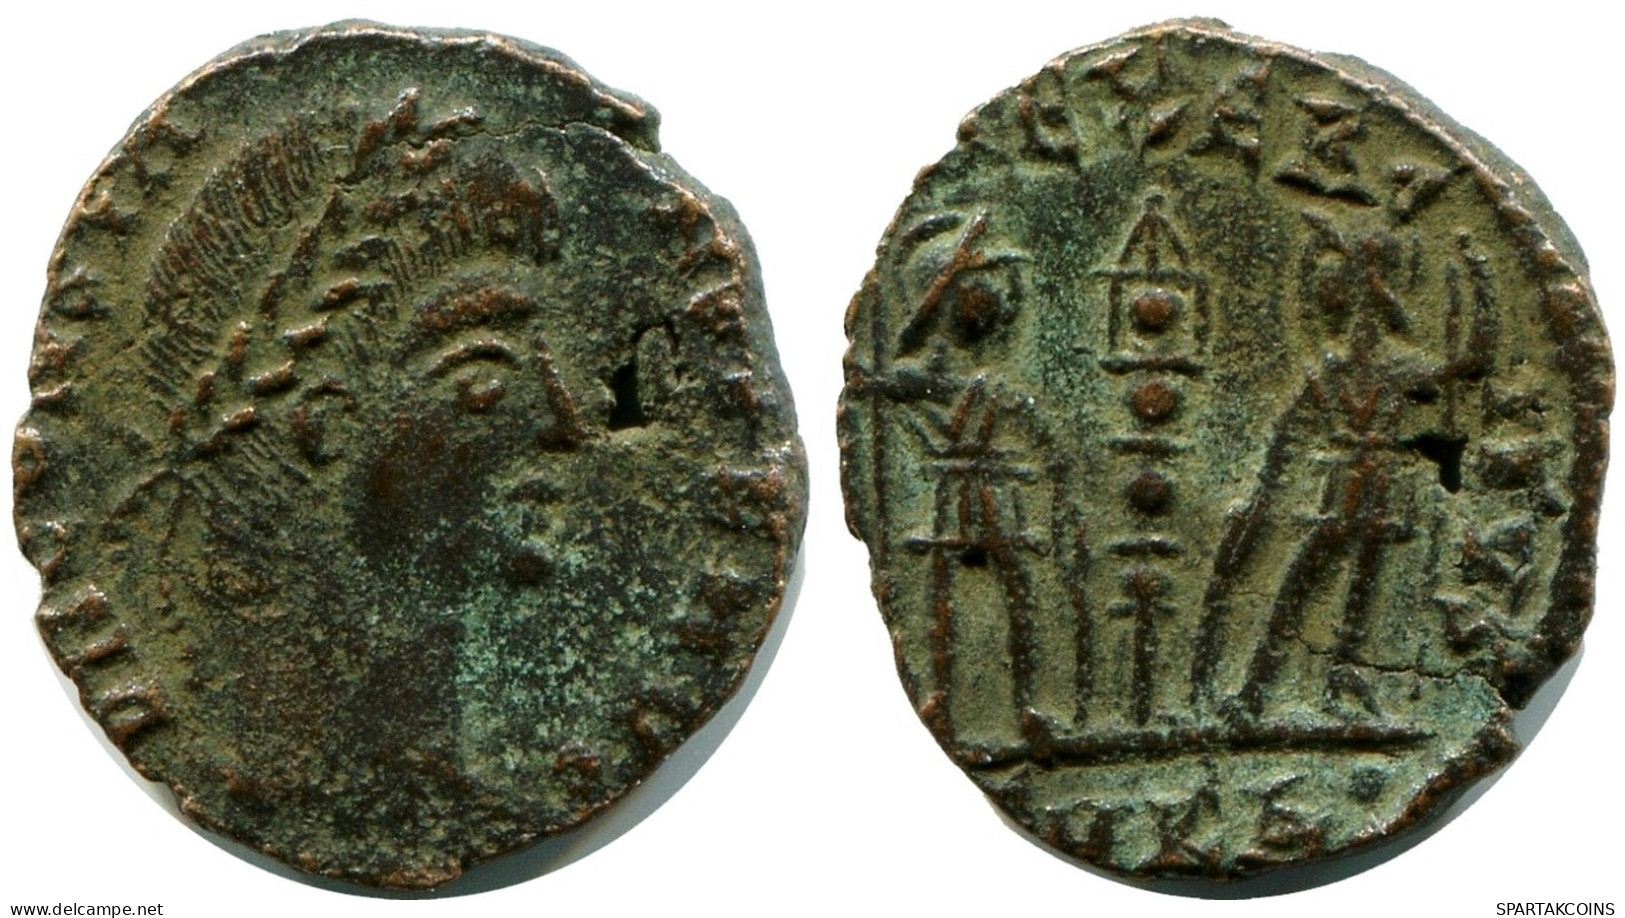 CONSTANS MINTED IN CYZICUS FOUND IN IHNASYAH HOARD EGYPT #ANC11660.14.U.A - El Imperio Christiano (307 / 363)